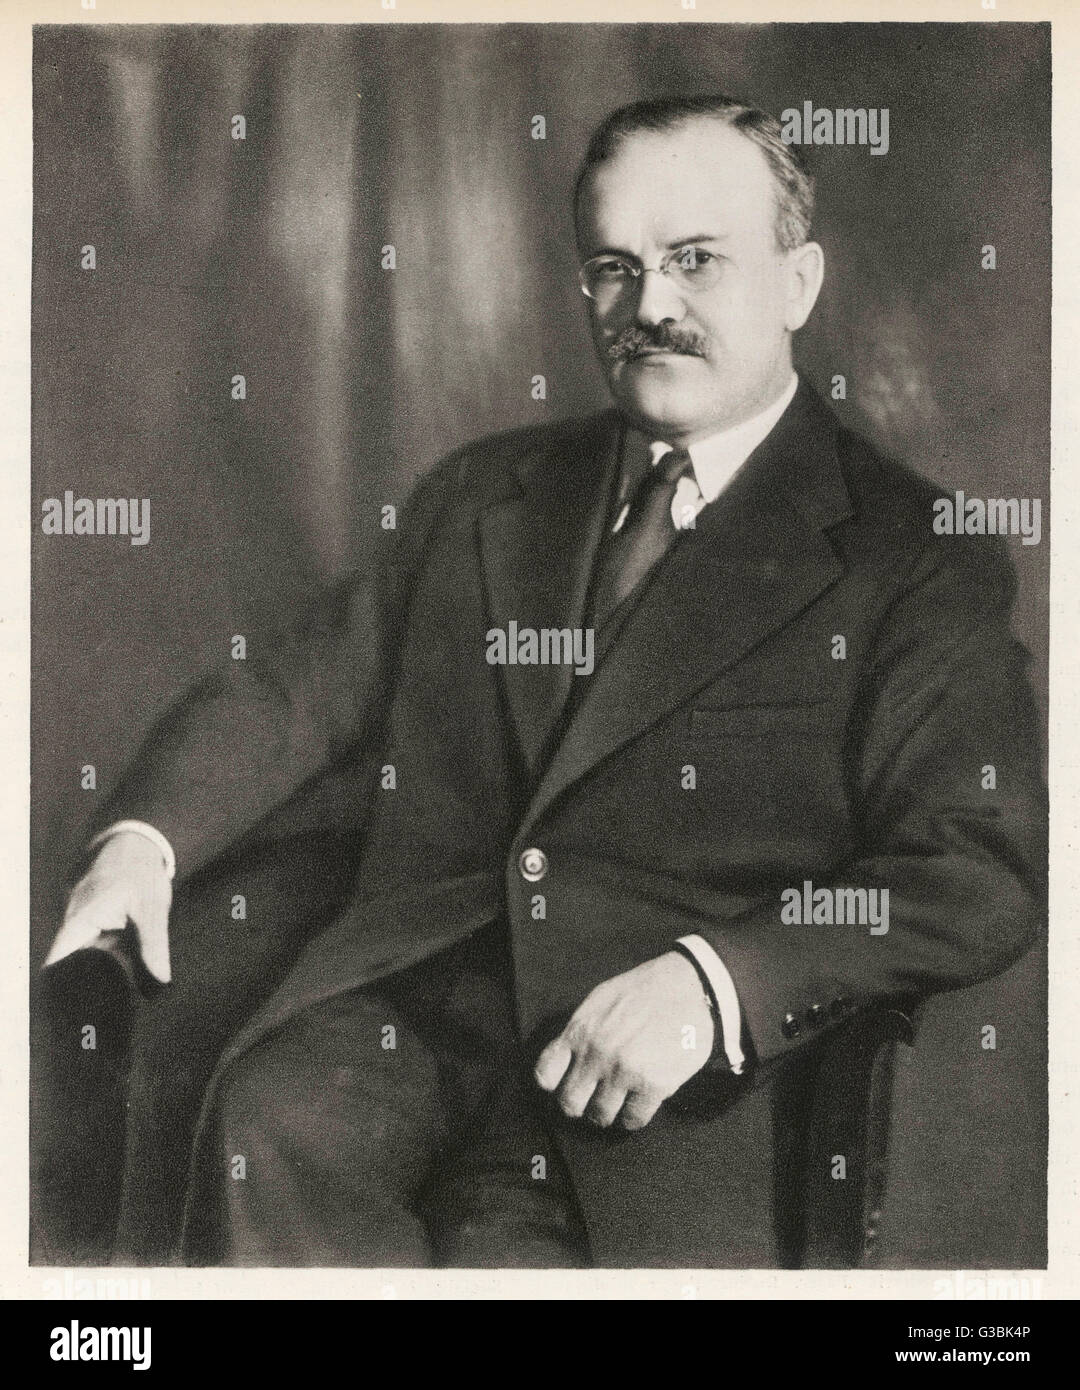 VYACHESLAV MIKHAYLOVICH  MOLOTOV, Russian statesman  whose revolutionary career  began in the 1905 rising, and  played a leading part in 1917, followed by senior posts.     Date: 1890 - 1986 Stock Photo